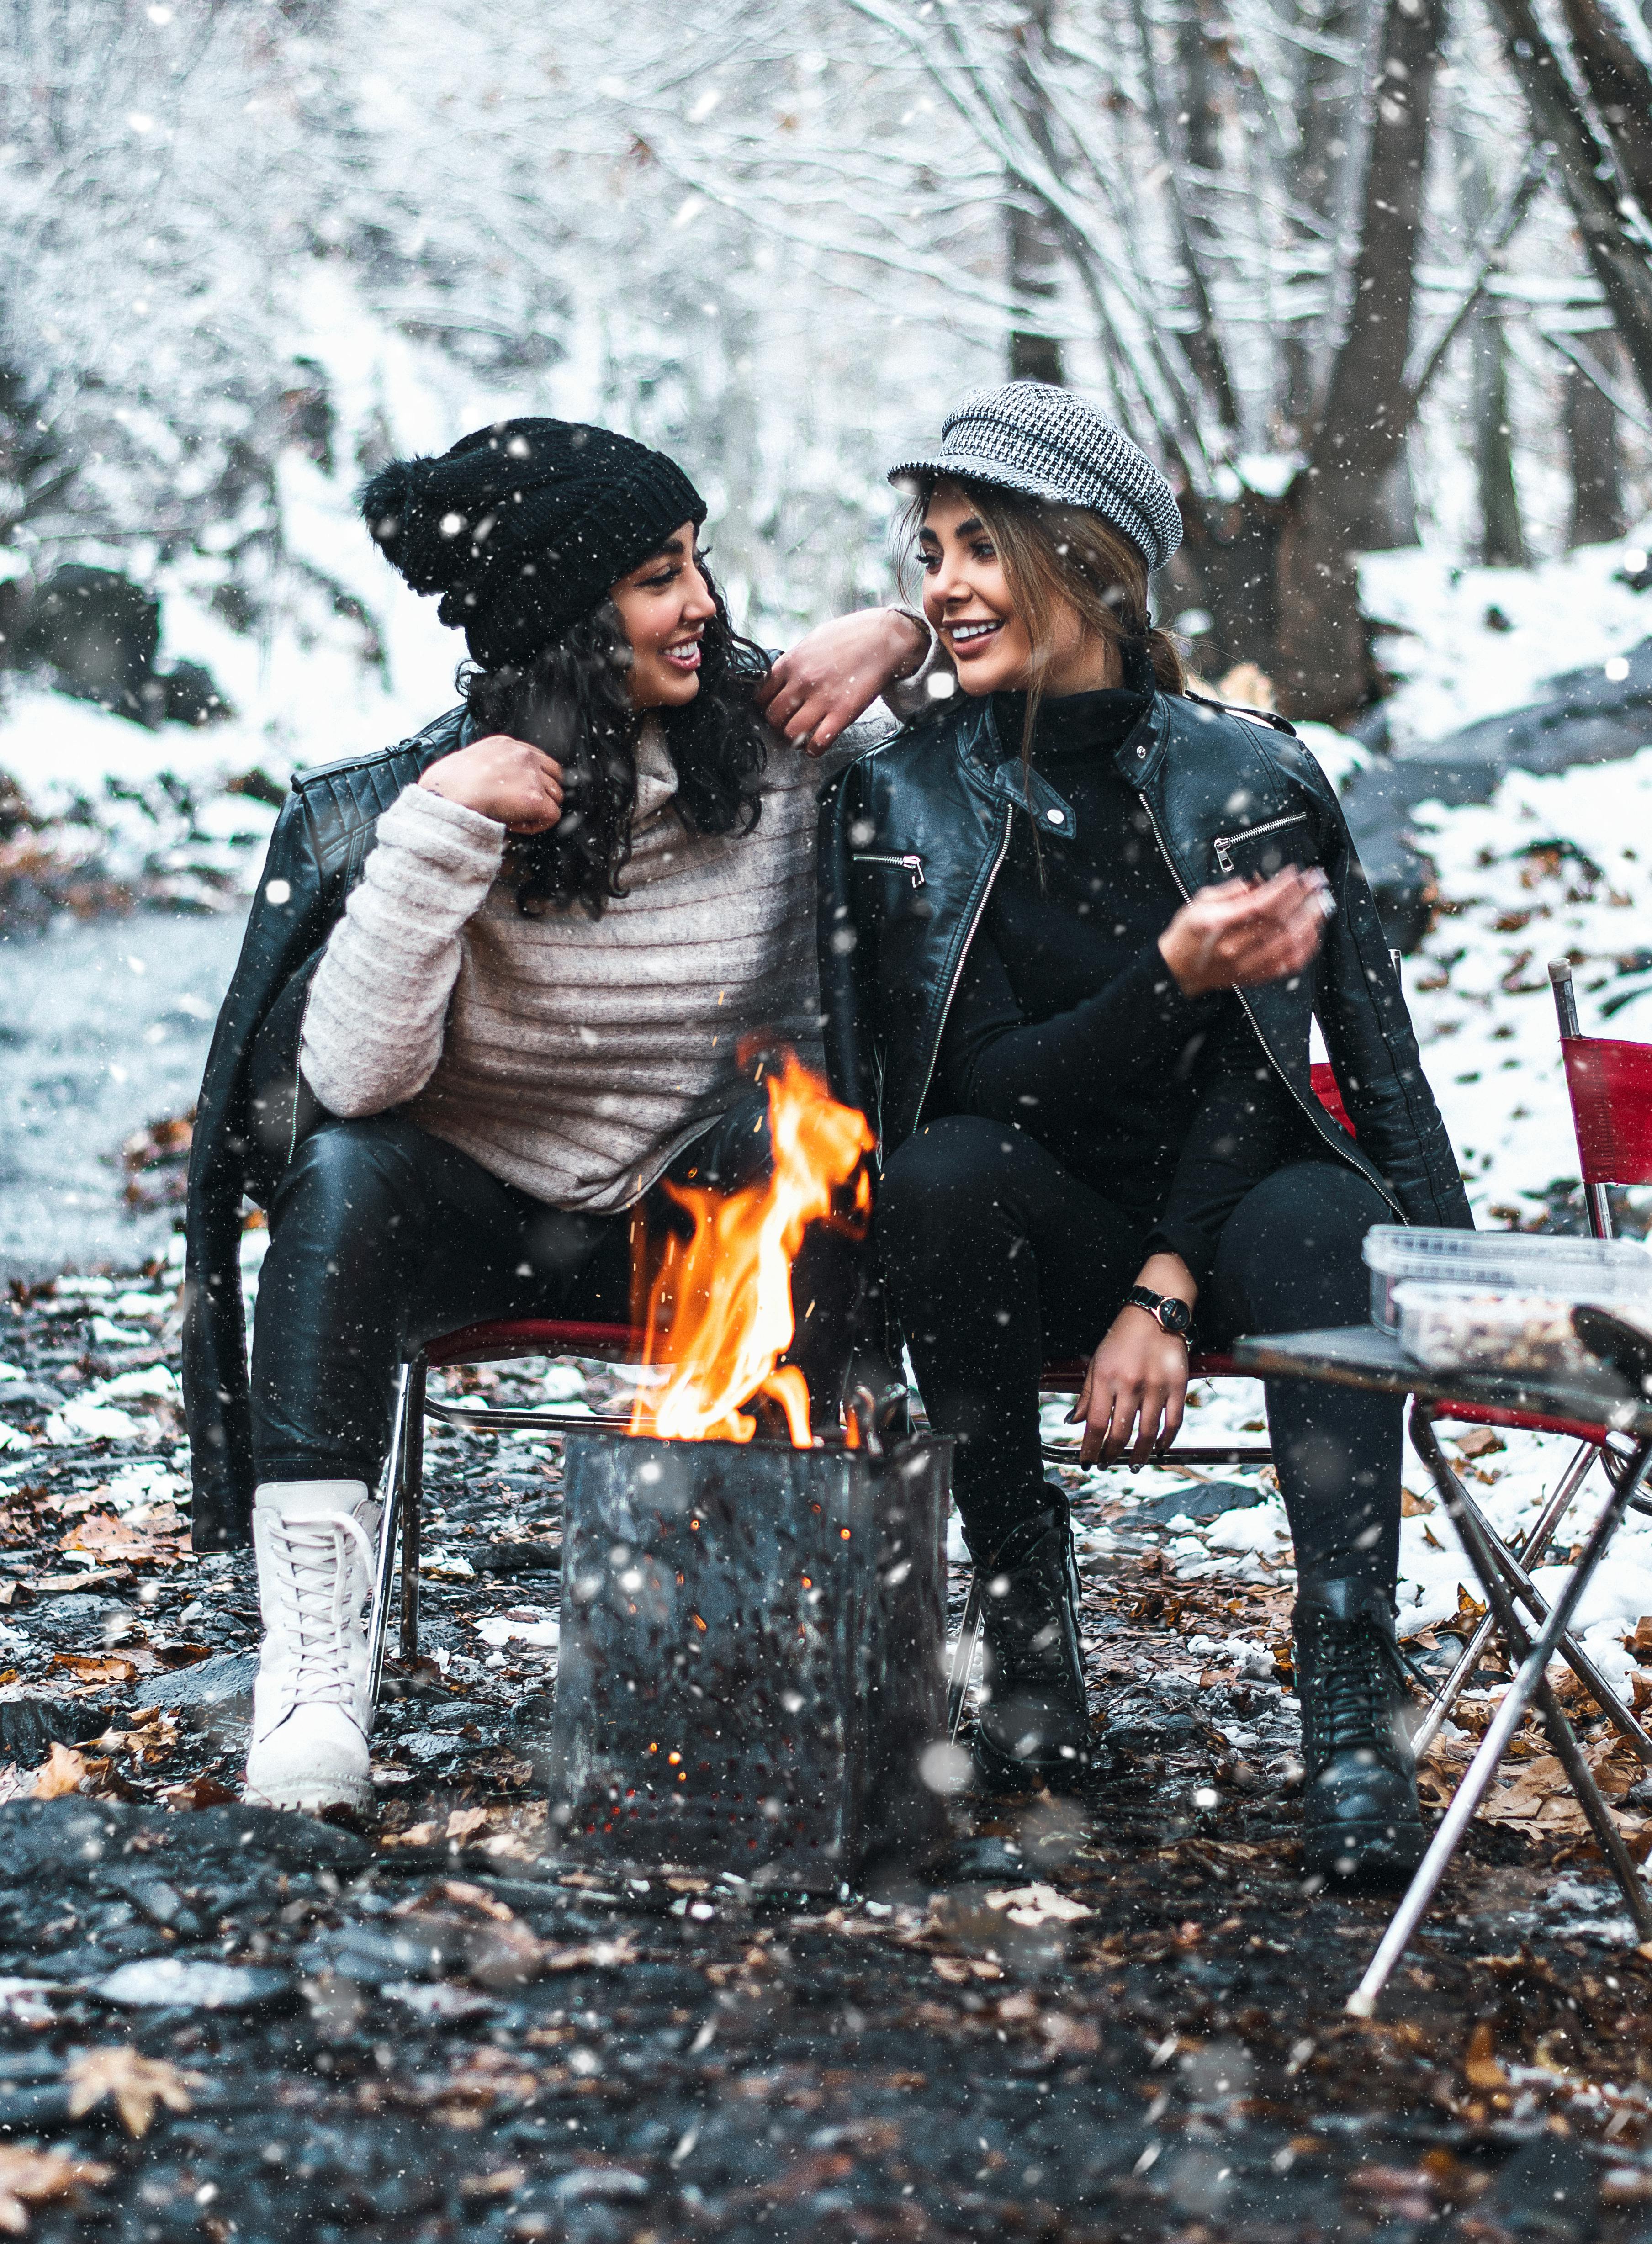 young girlfriends in leather jackets sitting near campfire and communicating